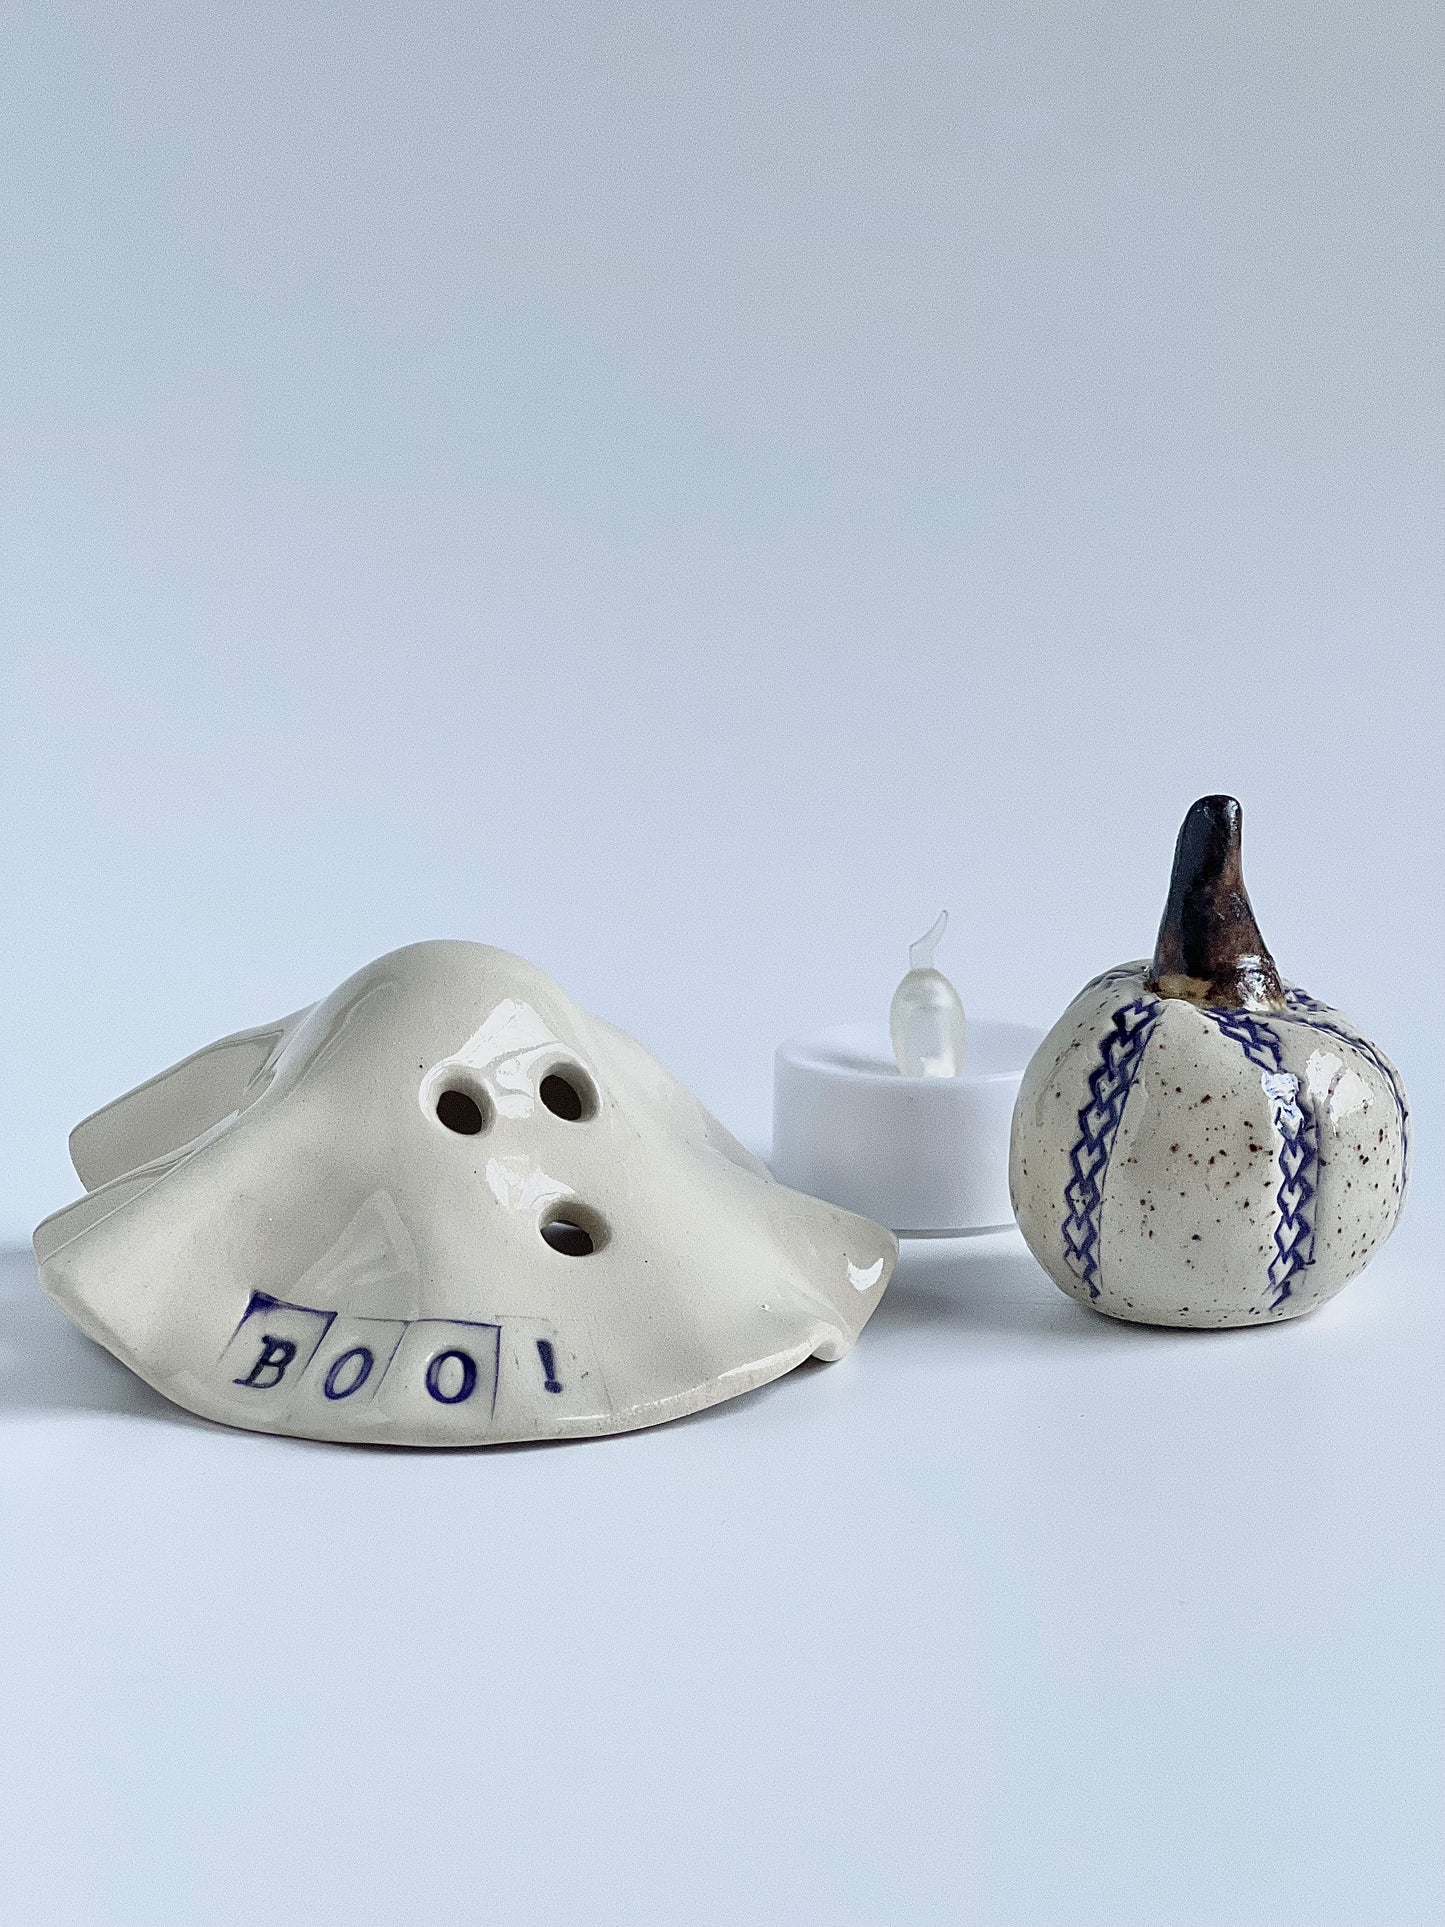 Ceramic Ghost with Mini Pumpkin (Includes Color Changing Tea Light) (G-6)